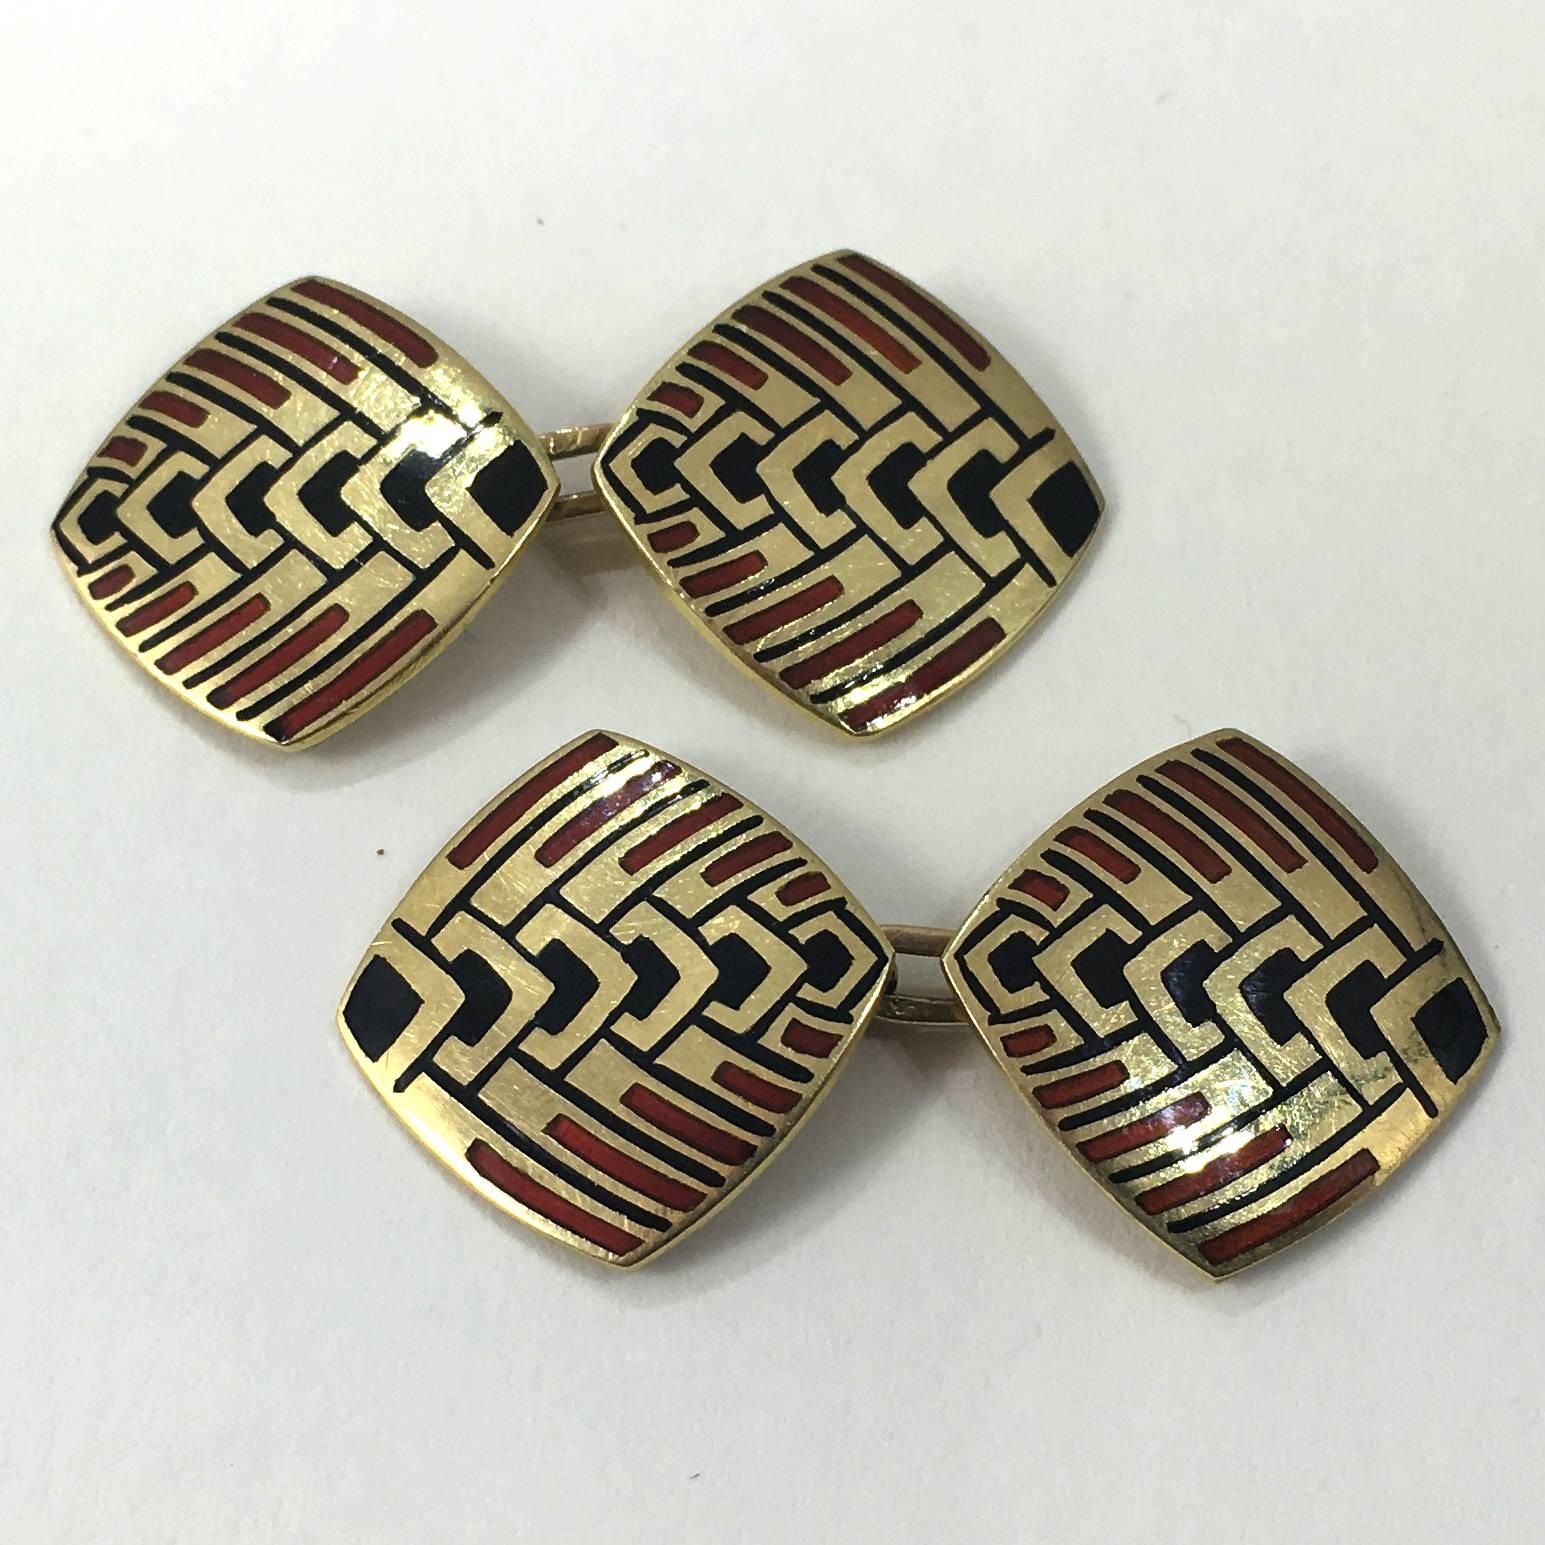 A pair of Art Deco double cufflinks with a geometric design of stylised feathers depicted by a black enamel chevron pattern with extended lines highlighted by red enamel bars on a gold base.

The red and black colour combination is typical of the